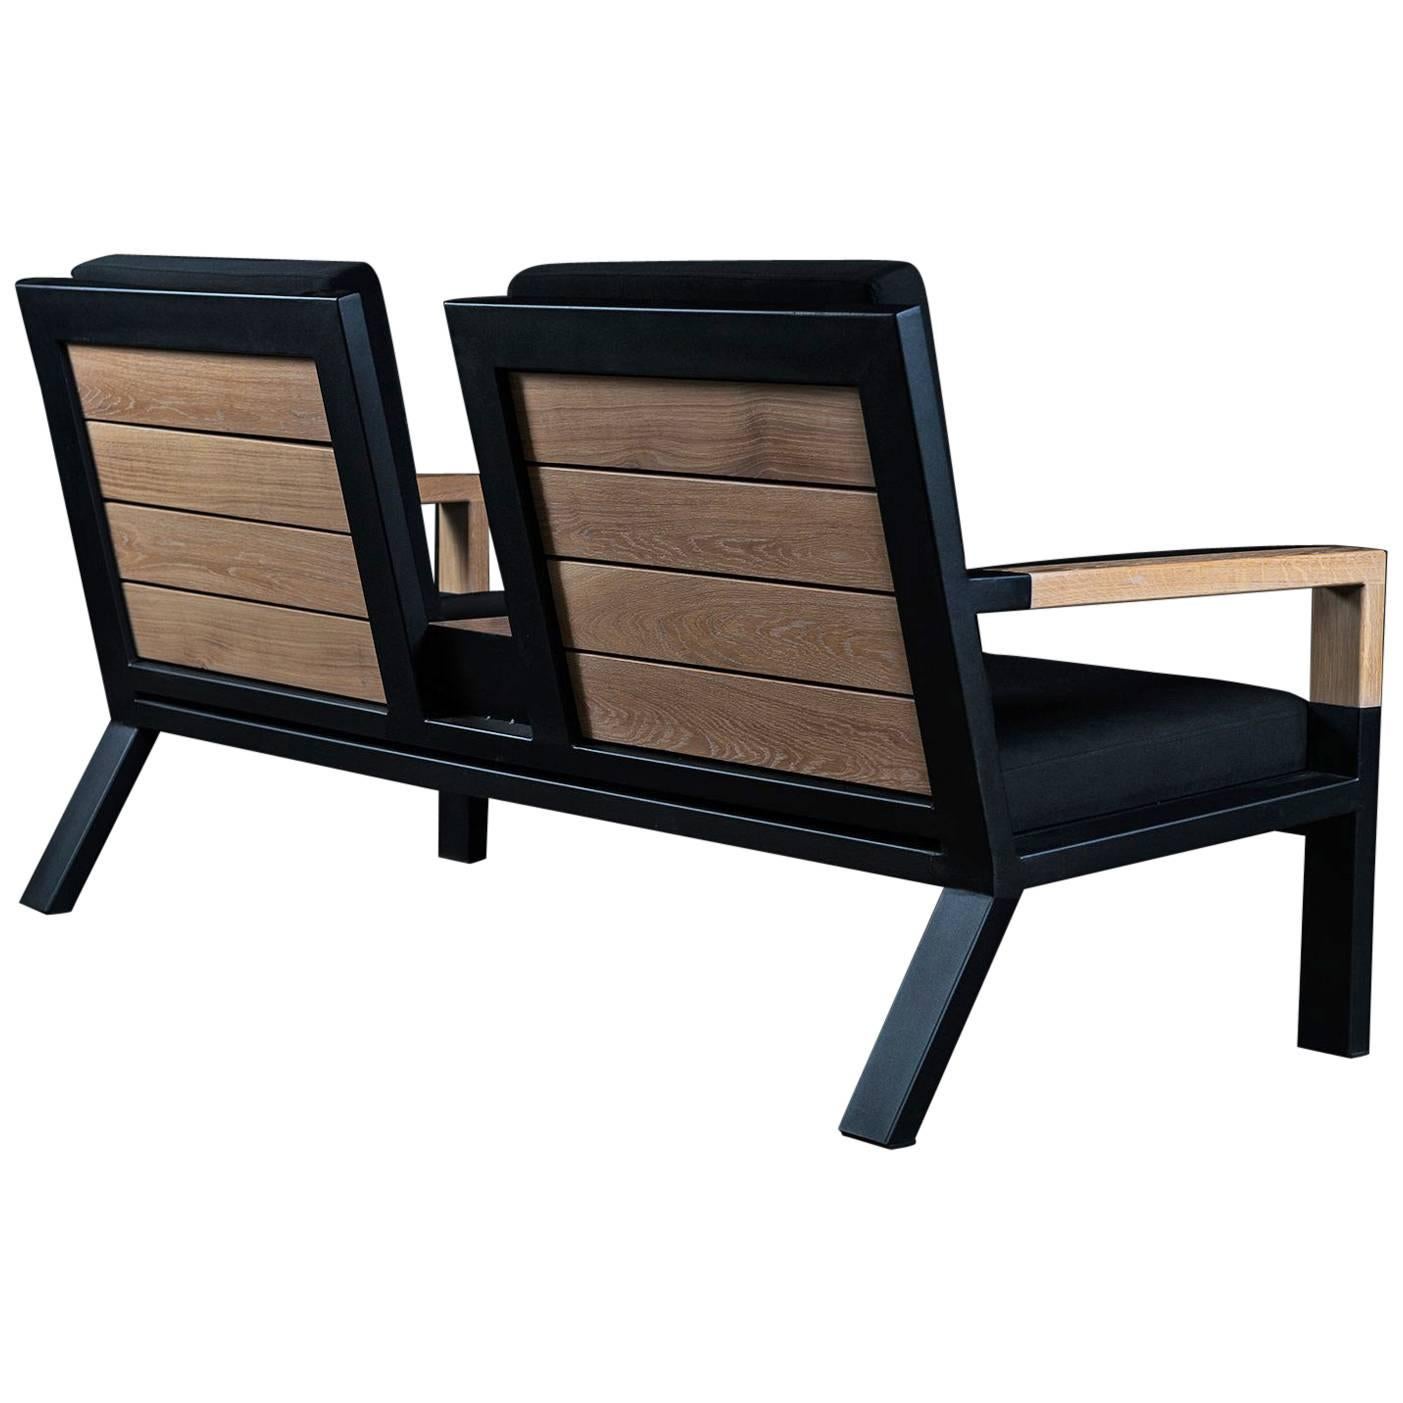 Baltimore Armchair Duo by Ambrozia, White Oak, Black Steel and Black Upholestry For Sale